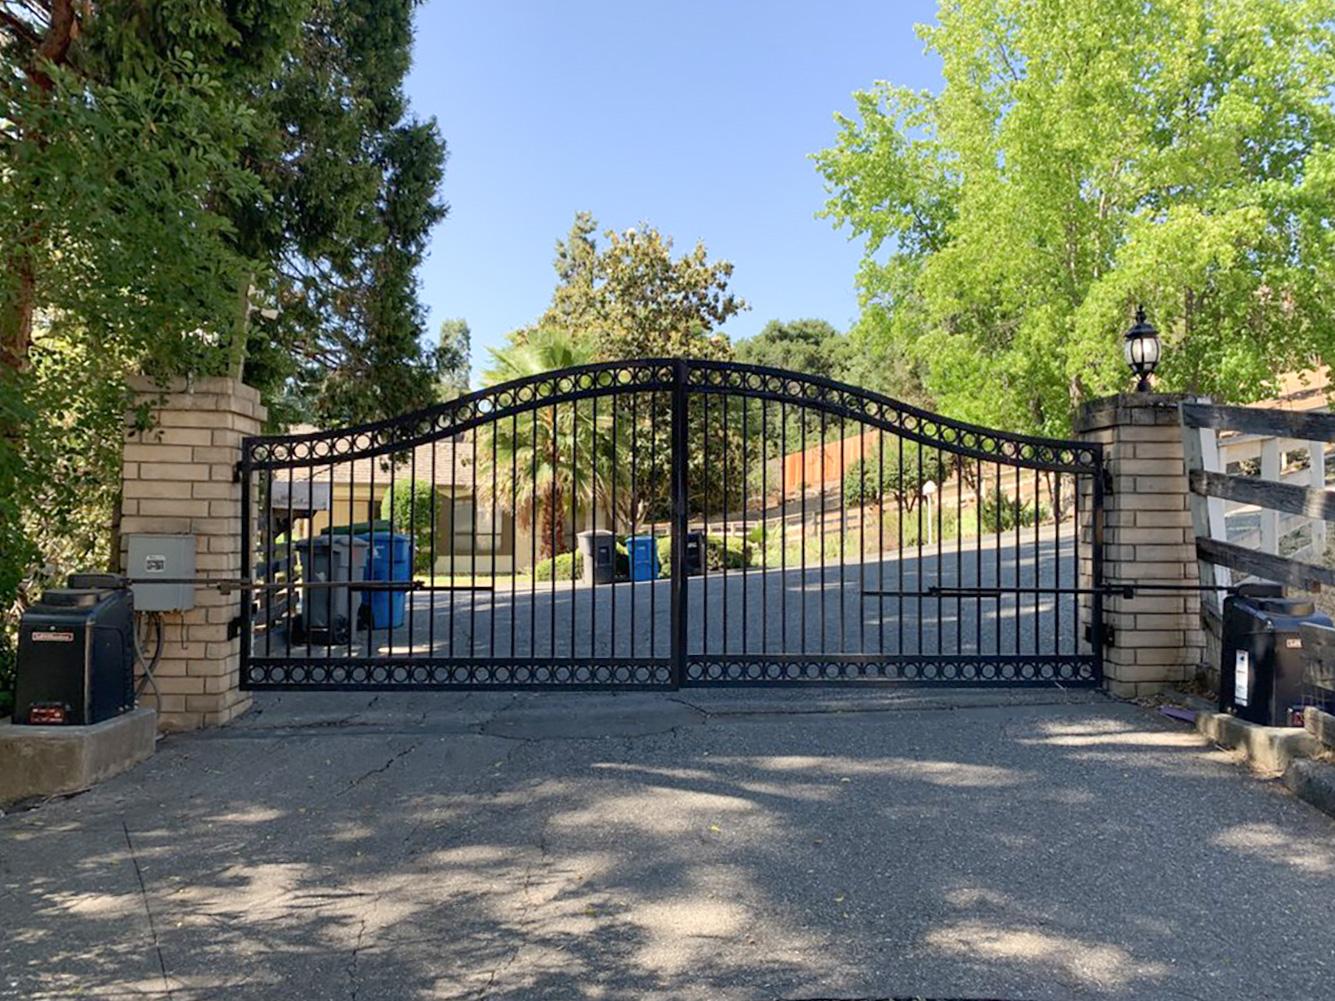 Picture of Automatic Gate Masters & Garage Doors, Inc. - Automatic Gate Masters & Garage Doors, Inc.